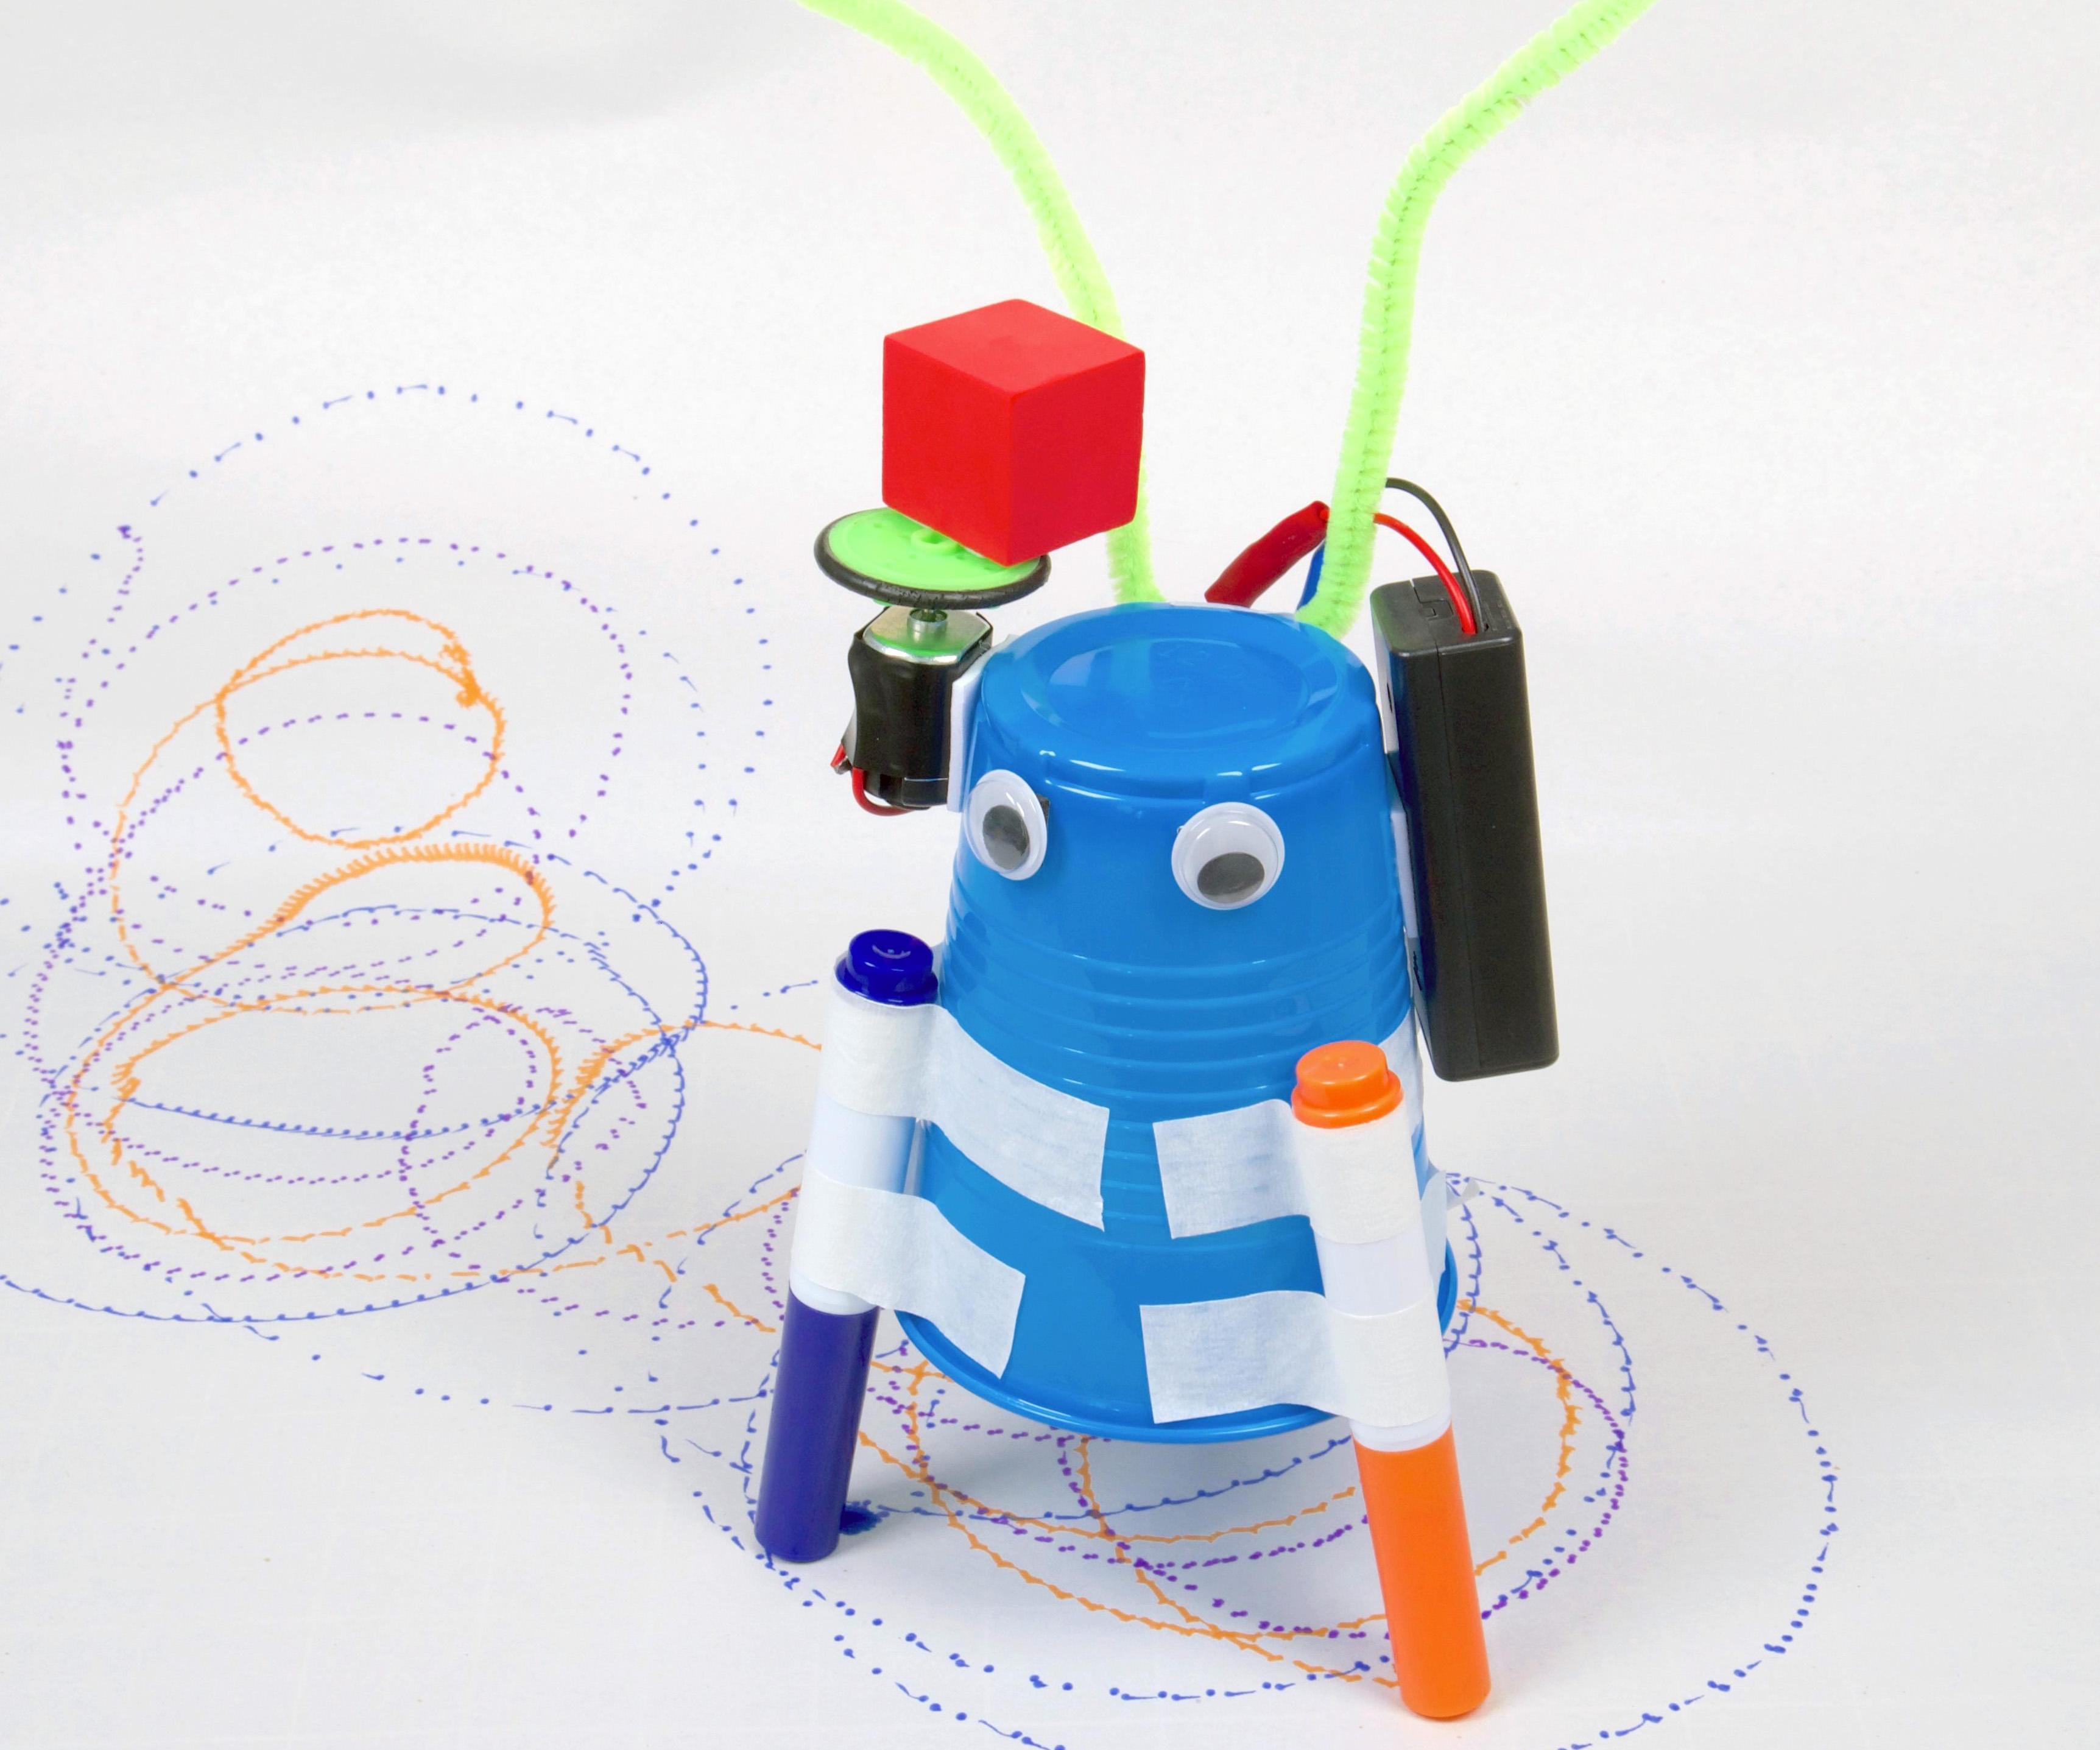 DIY Scribbling Doodle Bot Project - STEM Classic Made Better